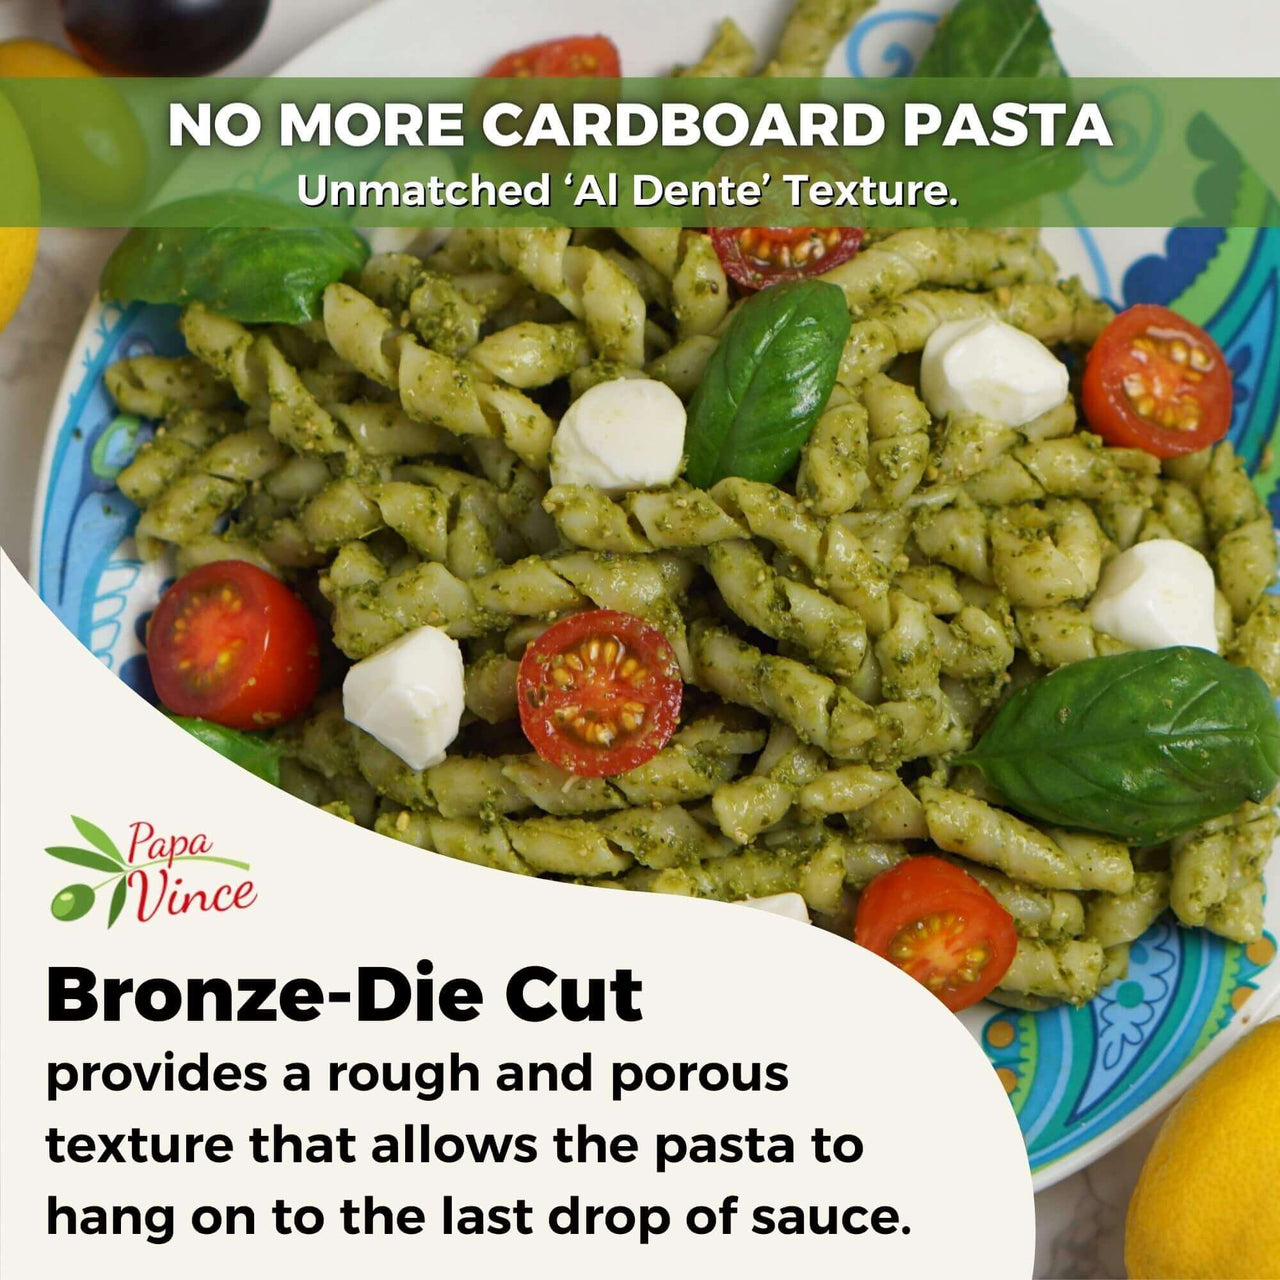 NO MORE CARDBOARD PASTA.  Papa Vince Unmatched ‘Al Dente’ Texture. Bronze-Die Cut. provides a rough and porous texture that allows the pasta to hang on to the last drop of sauce.